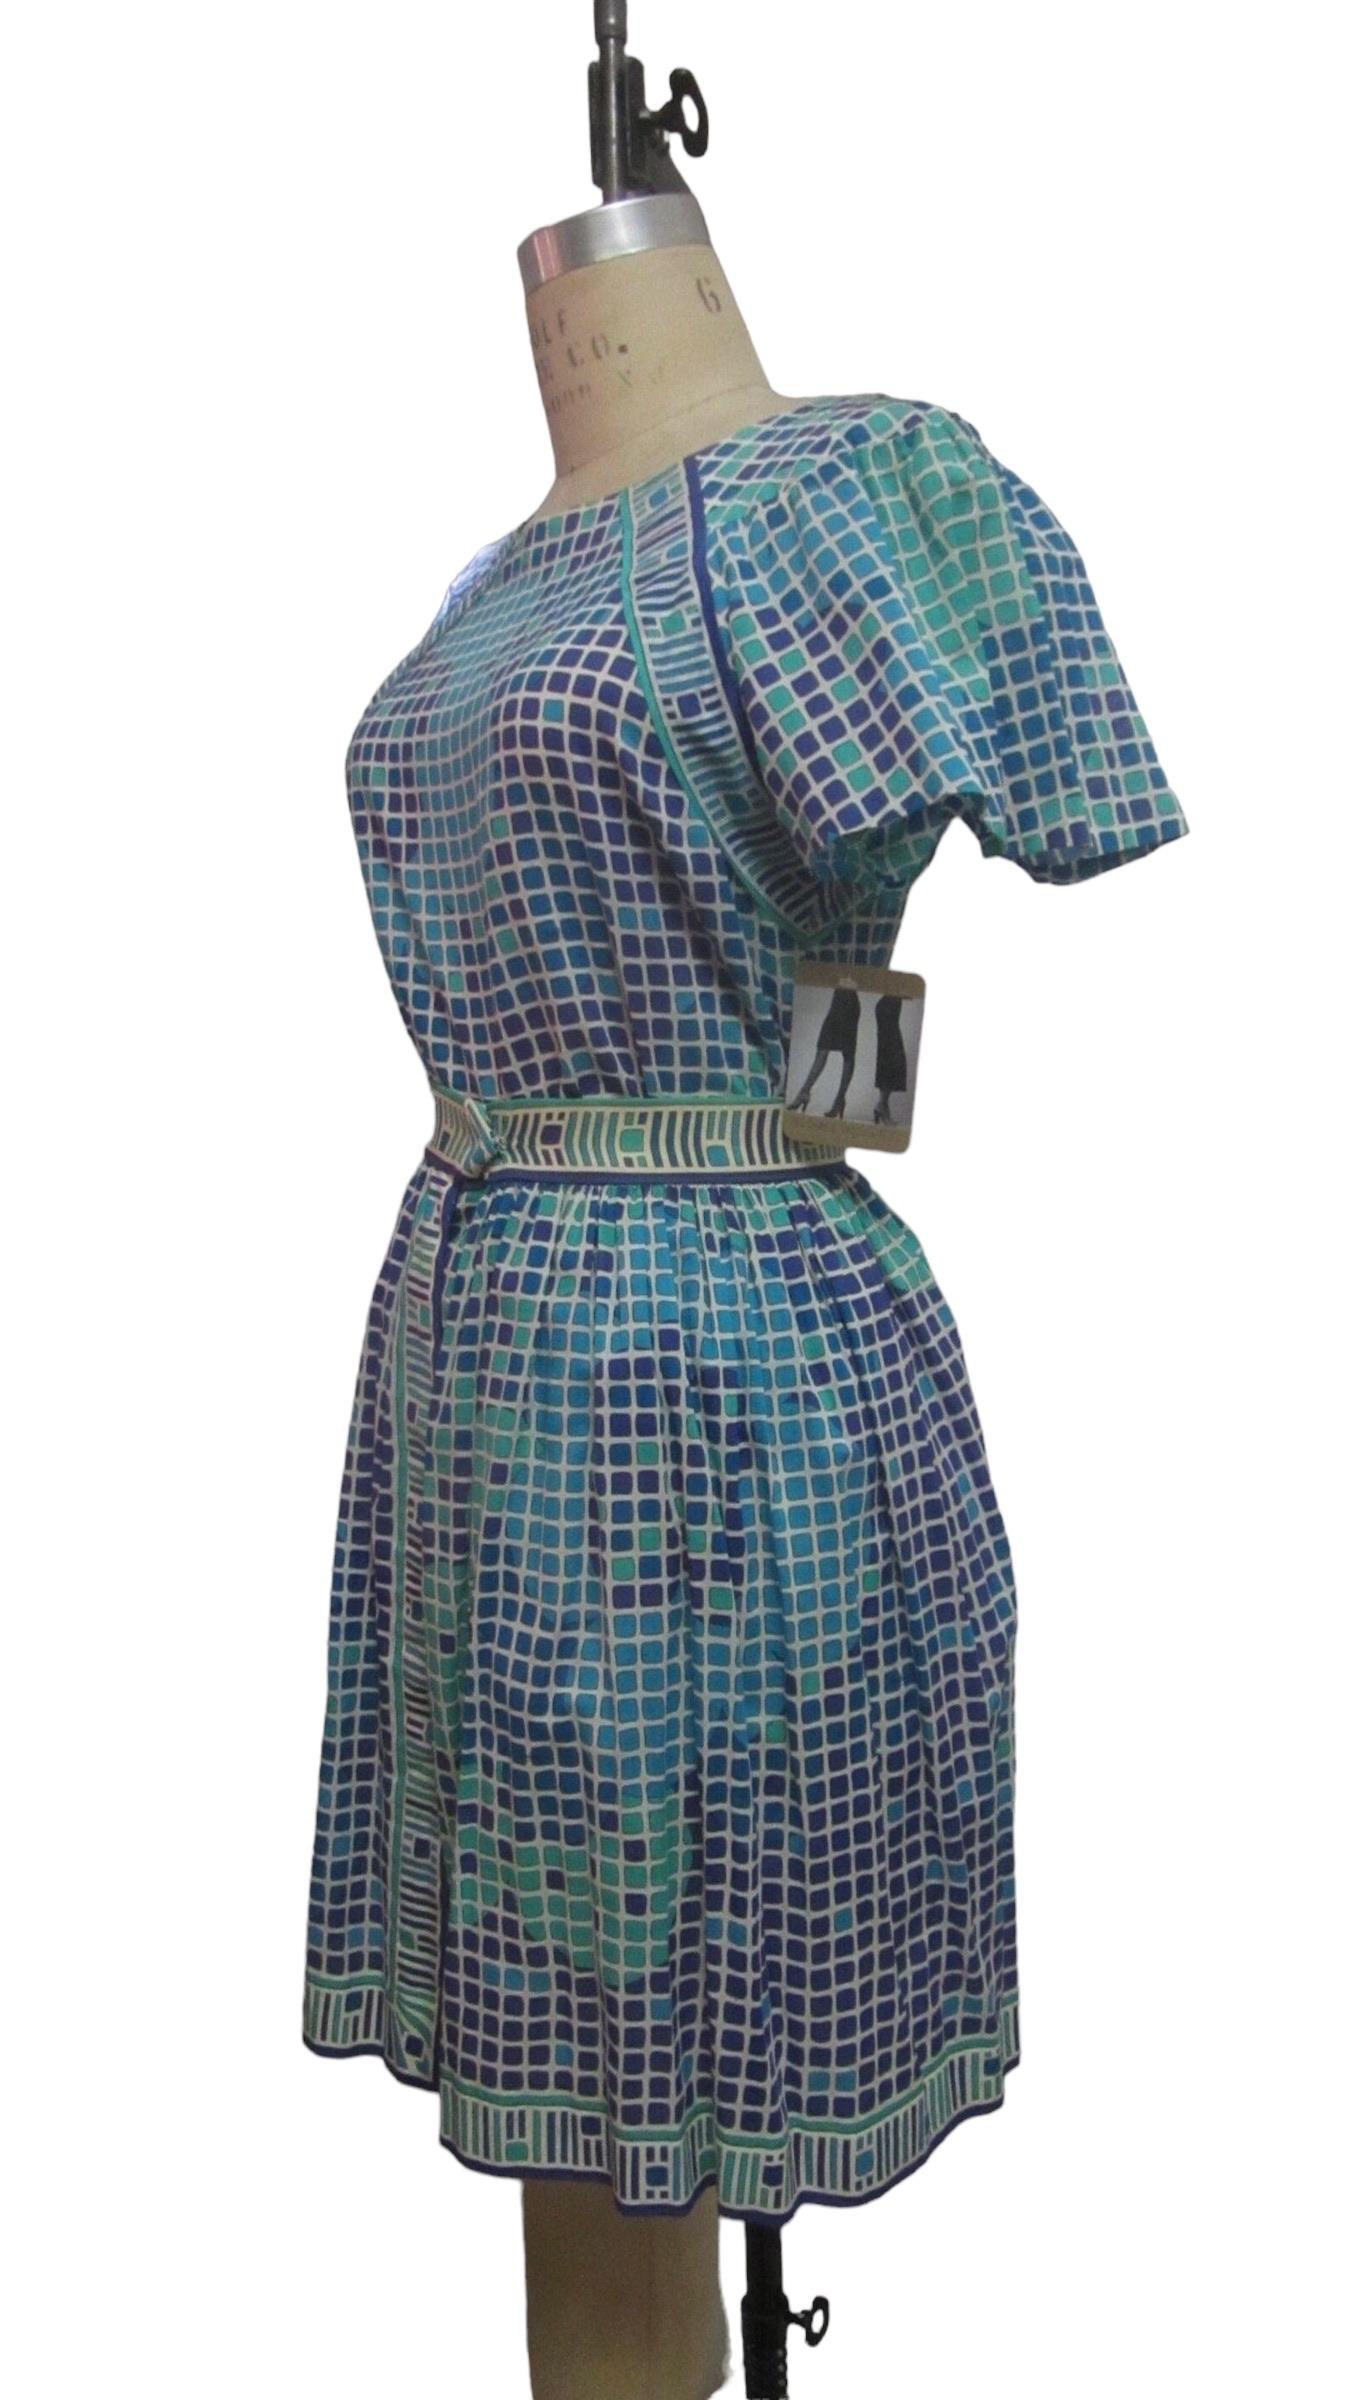 Emilio Pucci Cotton Geometric Print Top and Skirt Set, Circa 1960s For Sale 1